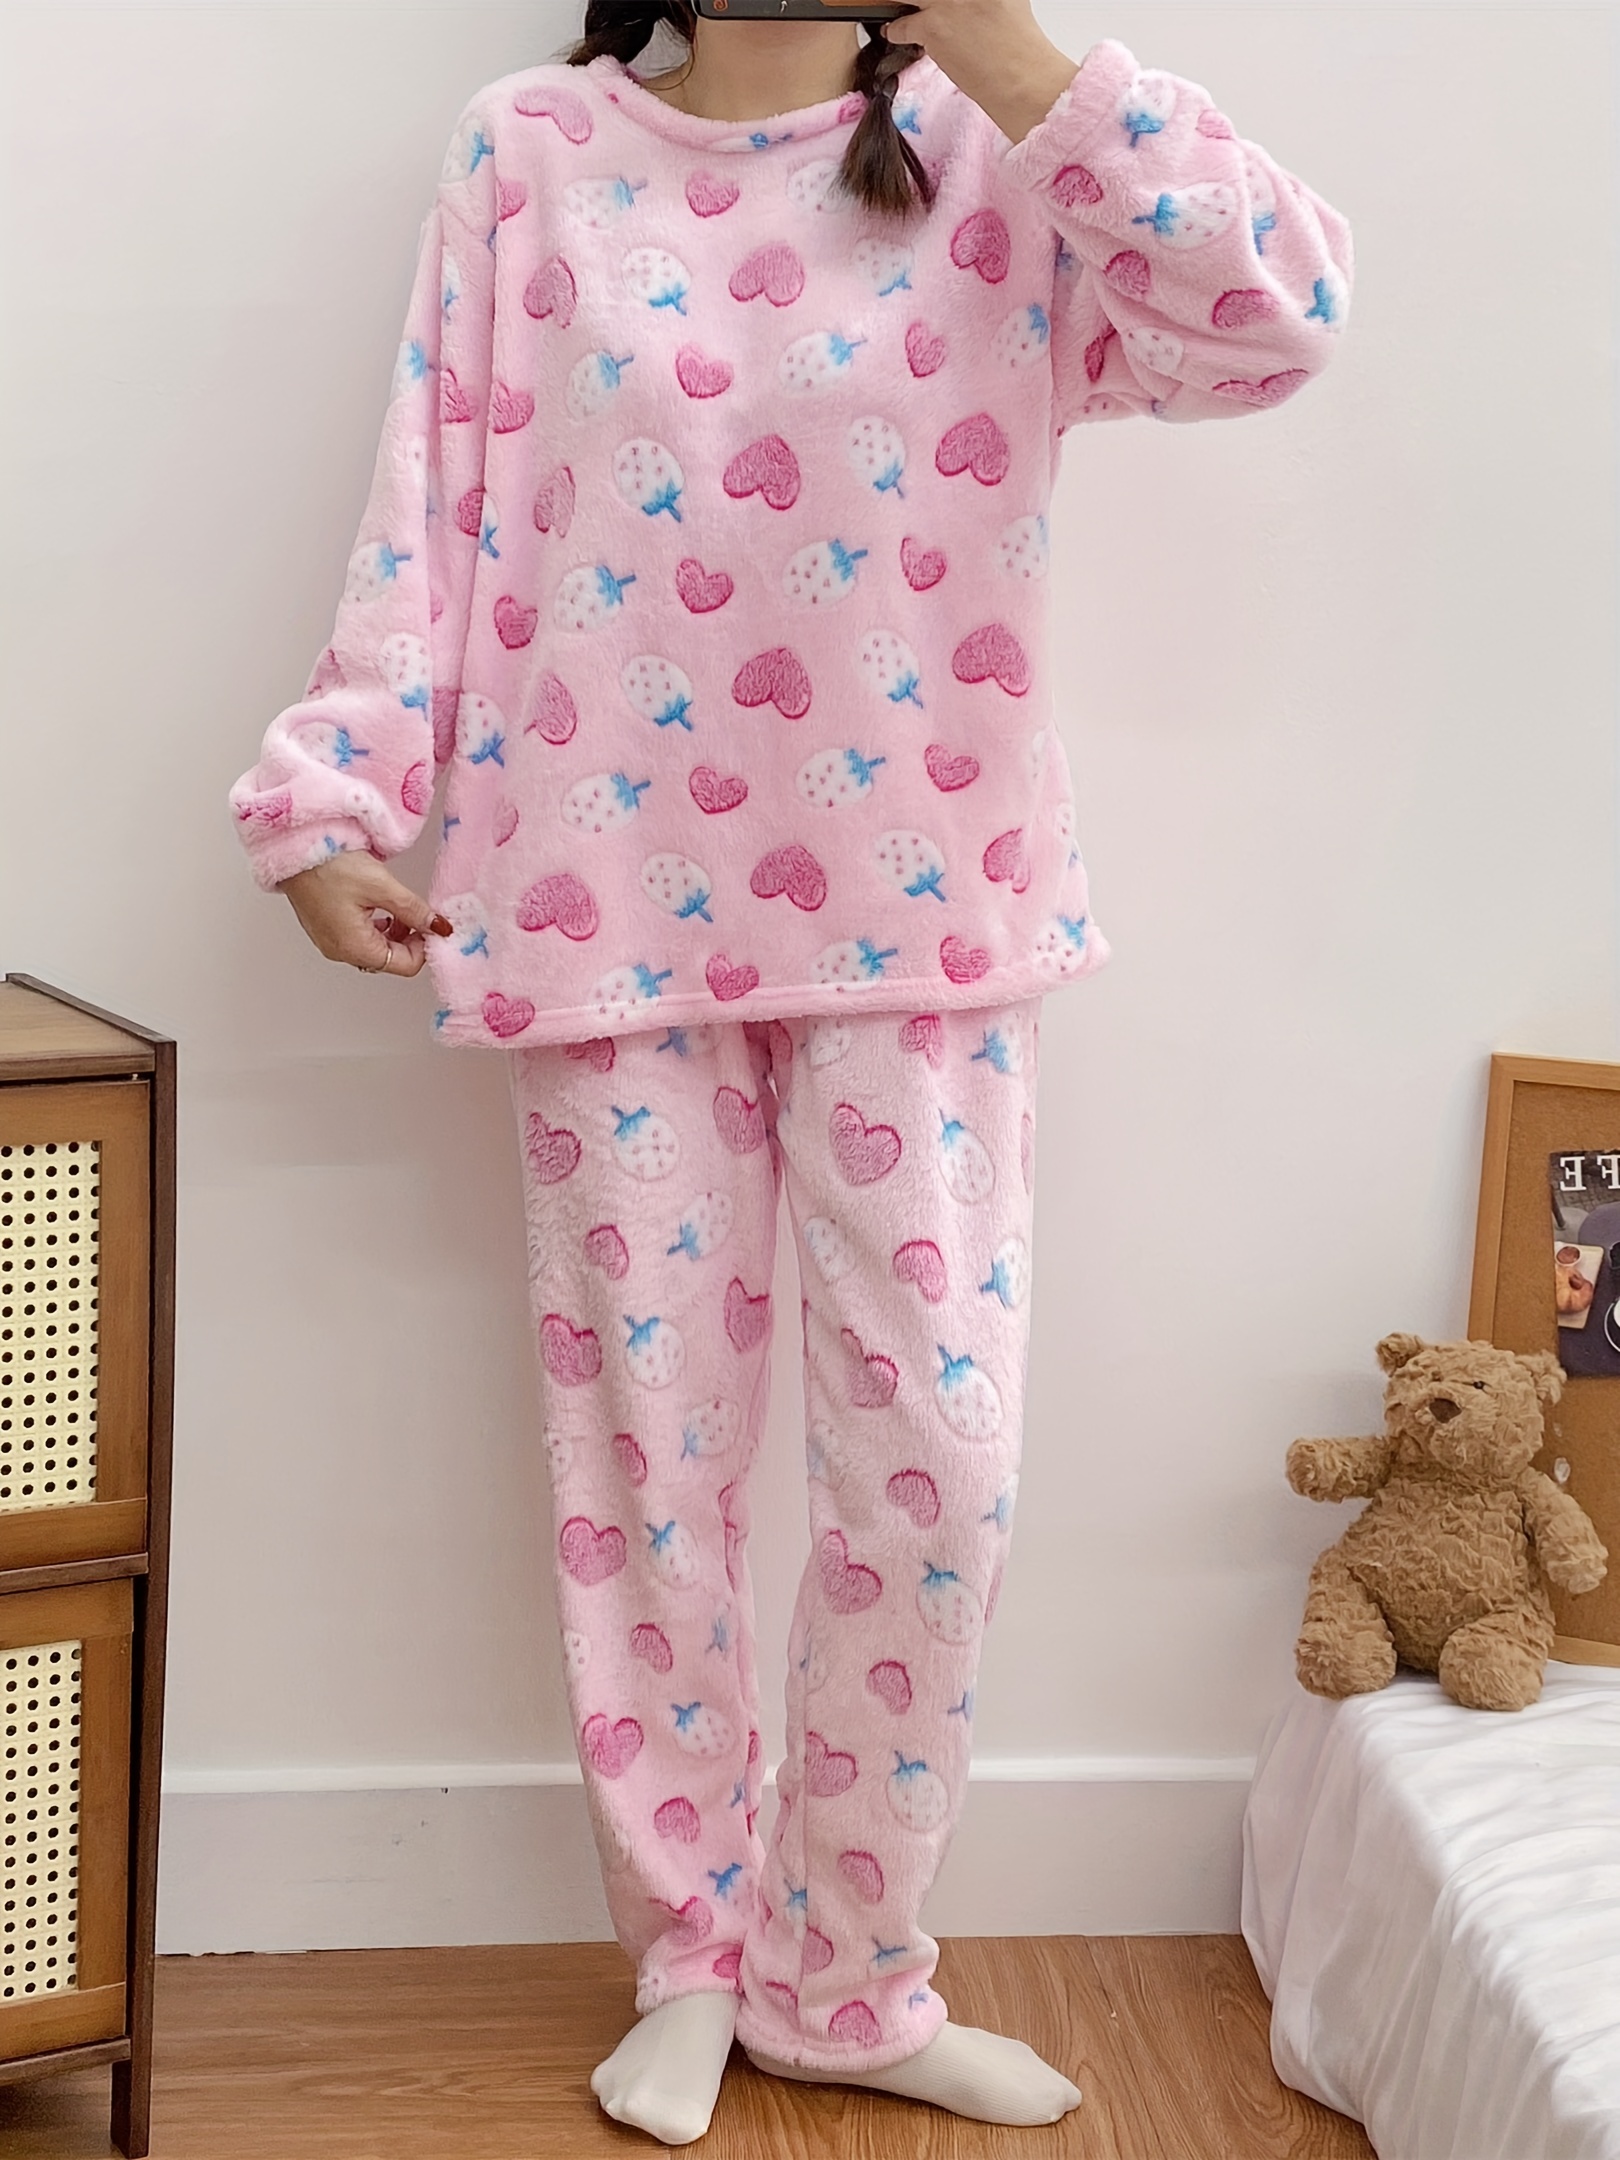 Women's Flannel Pajama Set in Pink